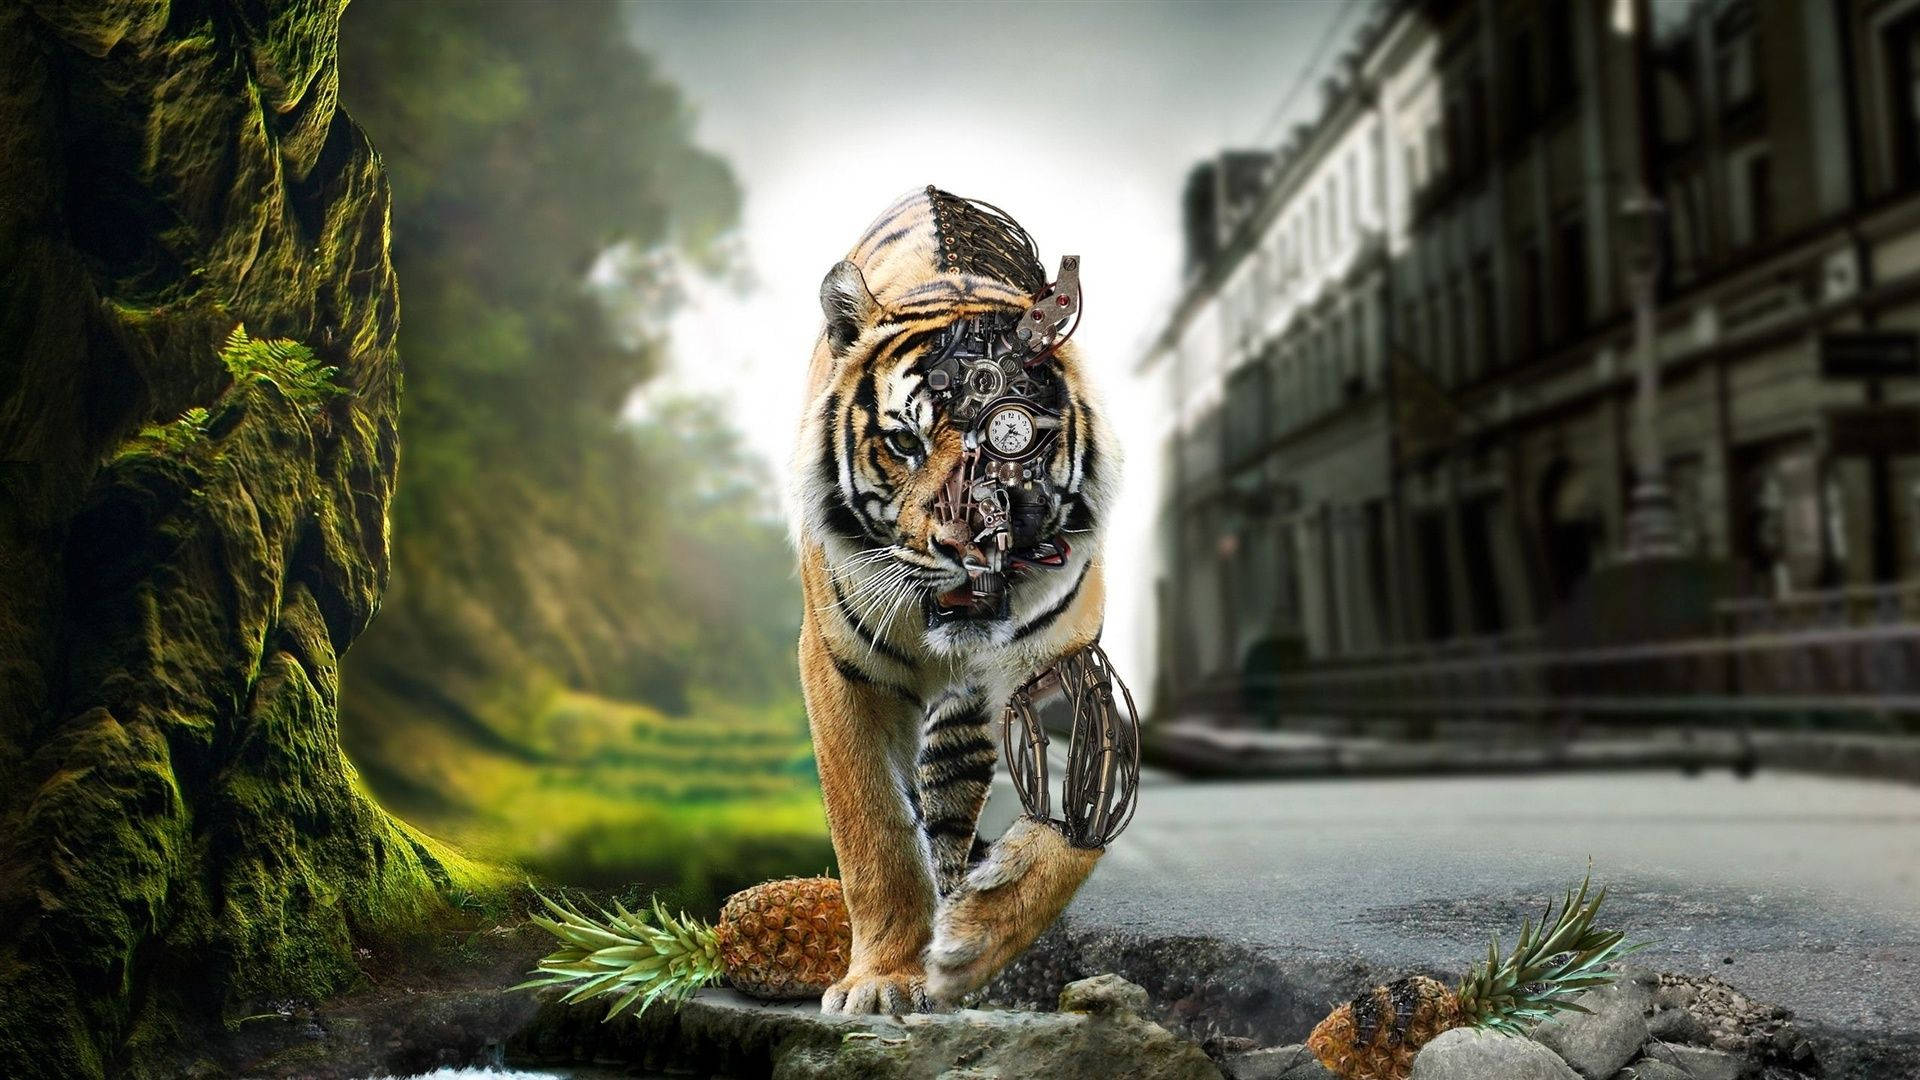 Tiger Nature And City Background